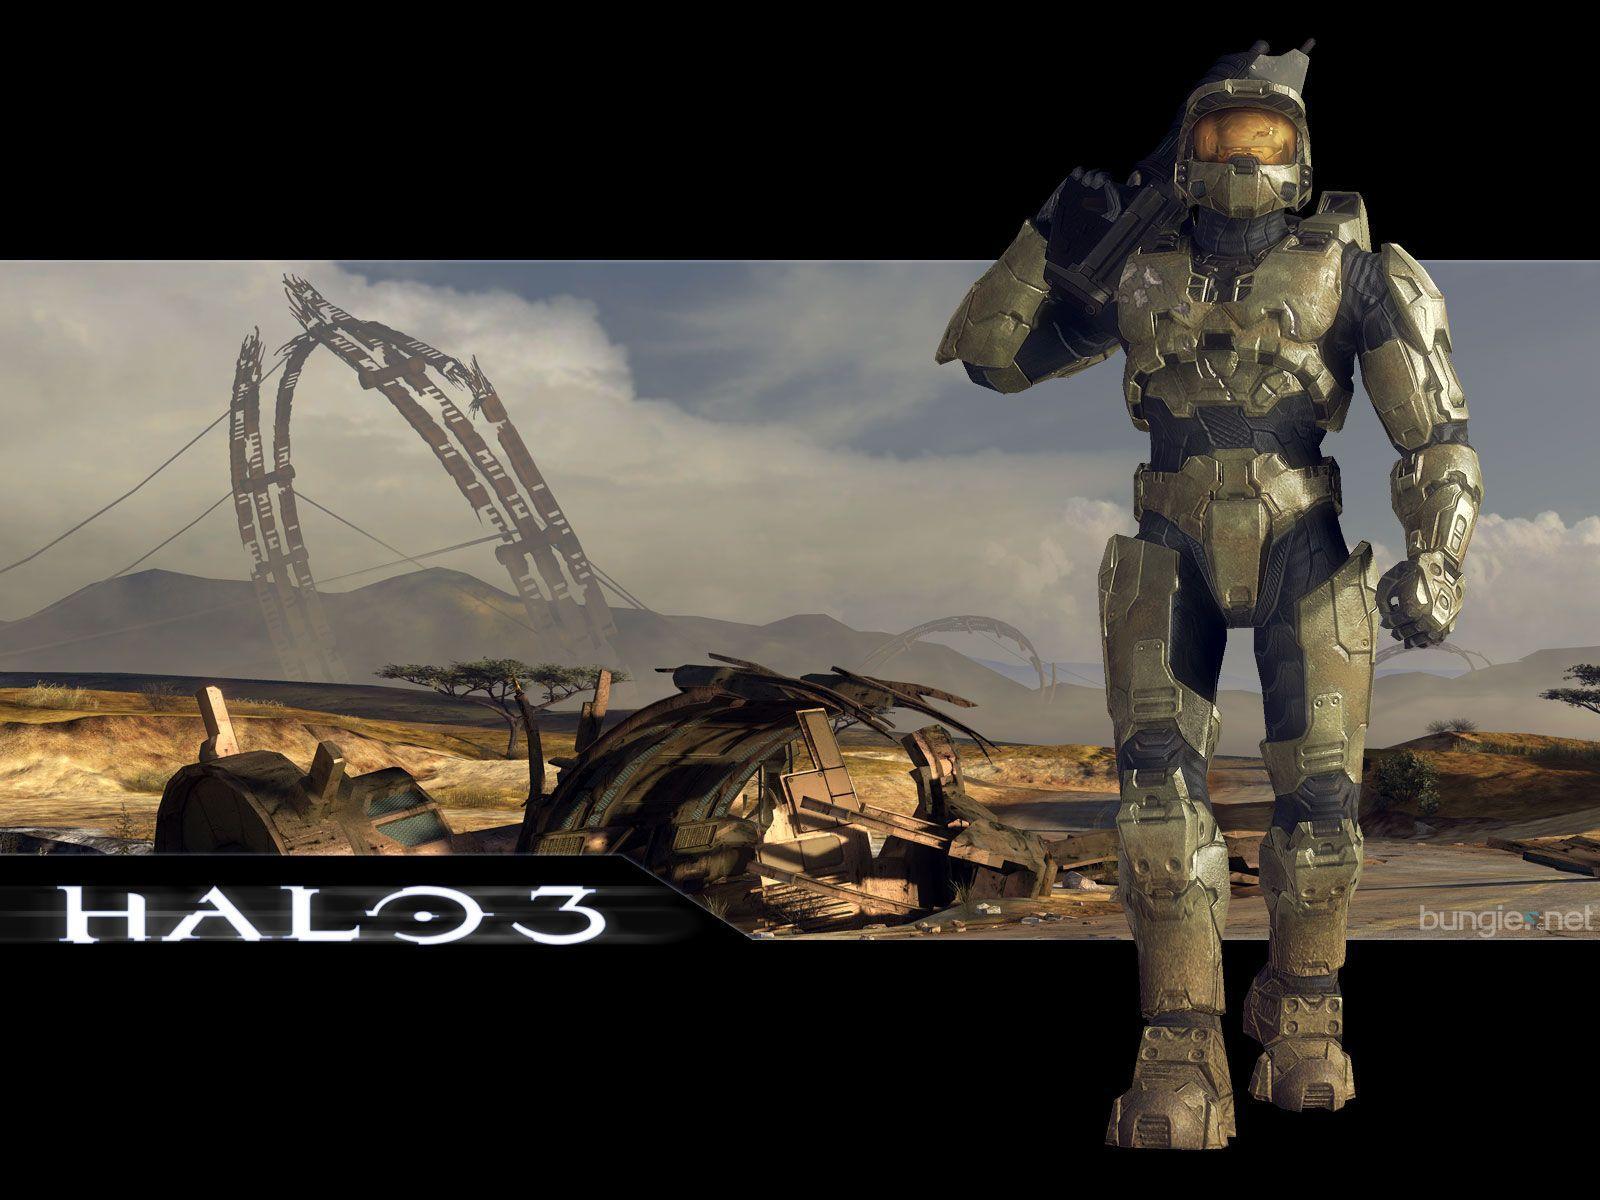 Halo 3 Wallpapers Halo 3